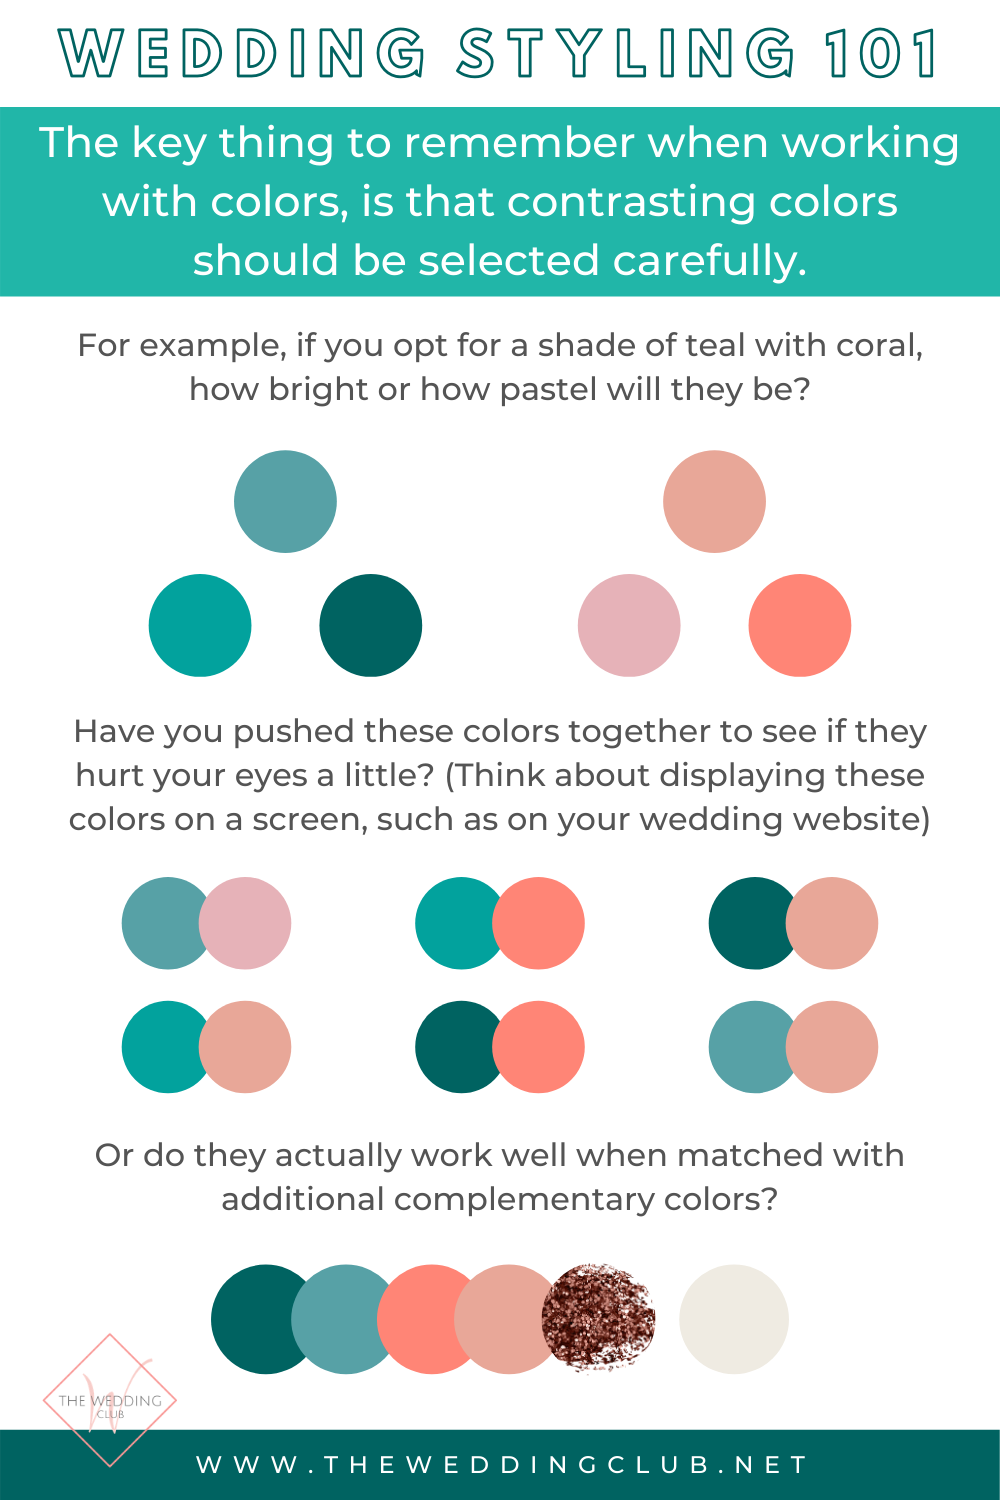 The key thing to remember when choosing colors for your wedding style, is to be careful when working with contrasting colors. Here is an infographic to display that example.